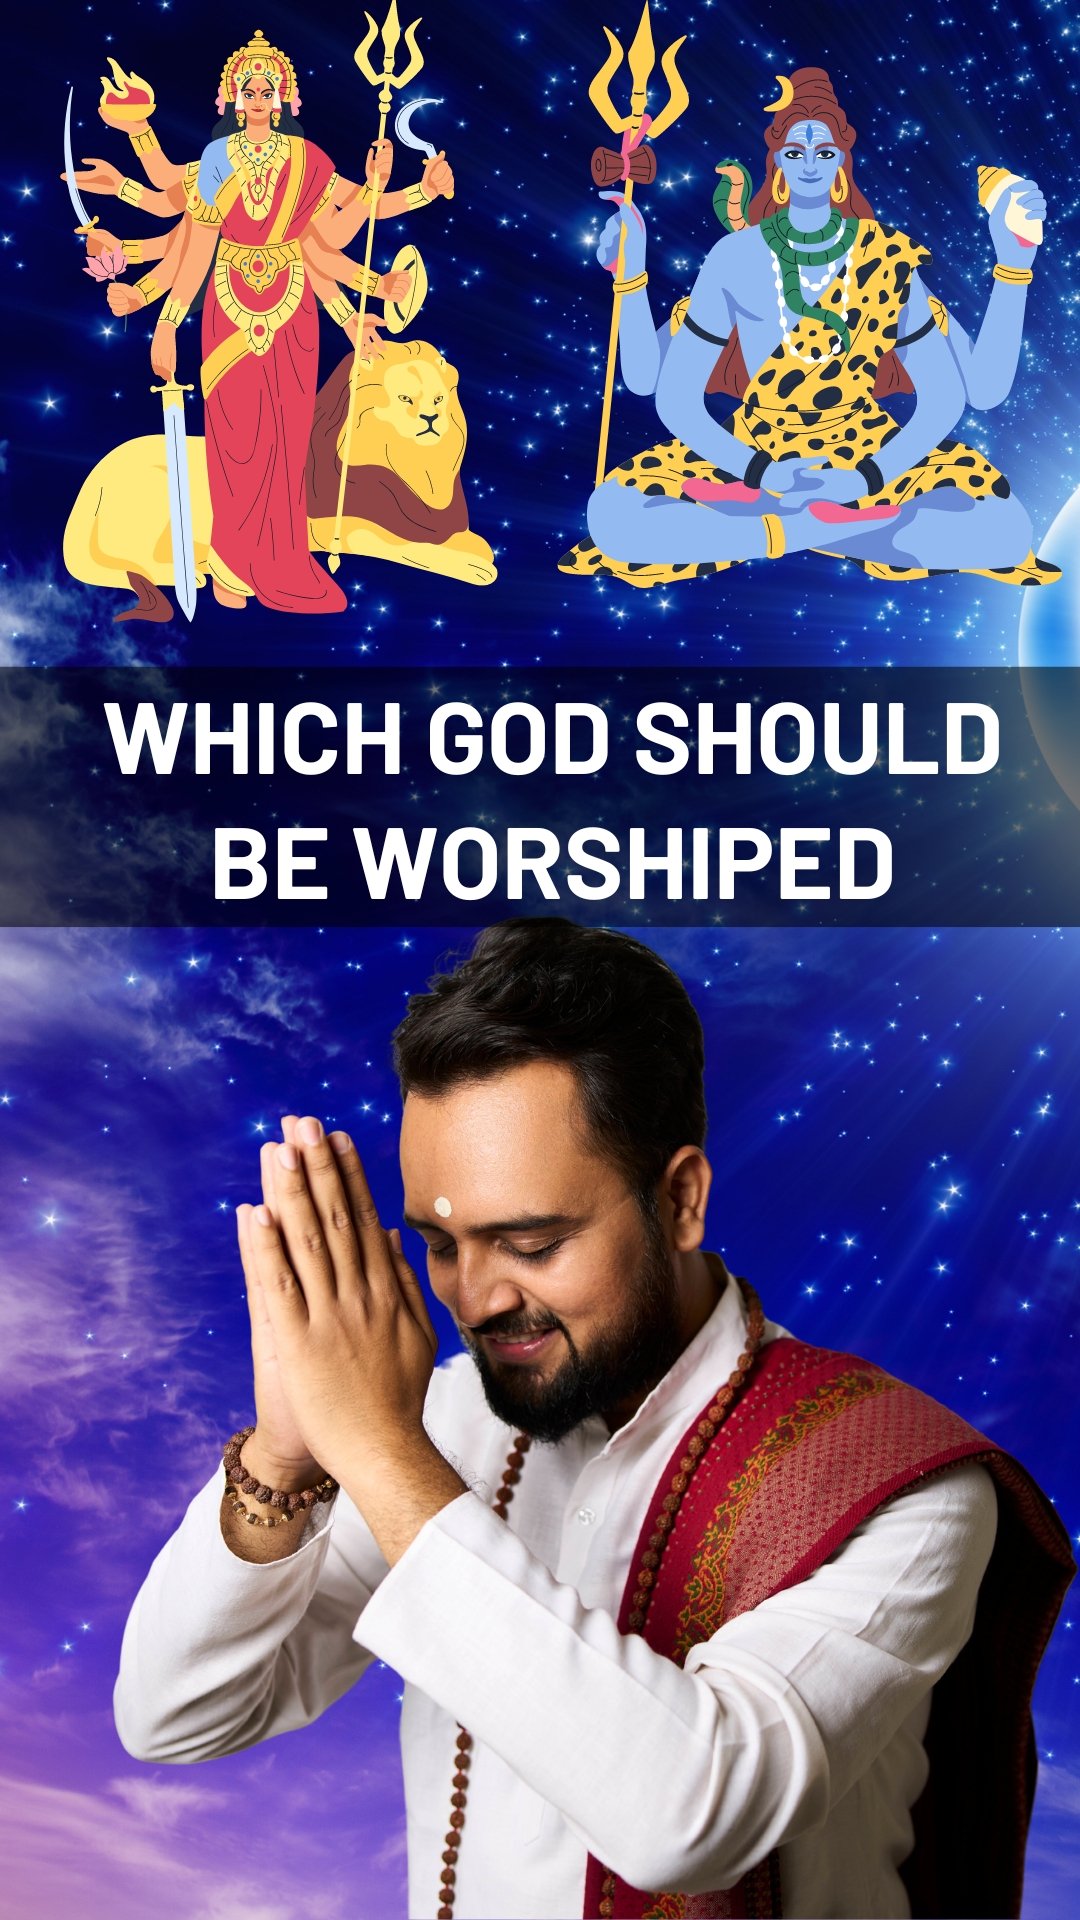 Which God should be worshipped?